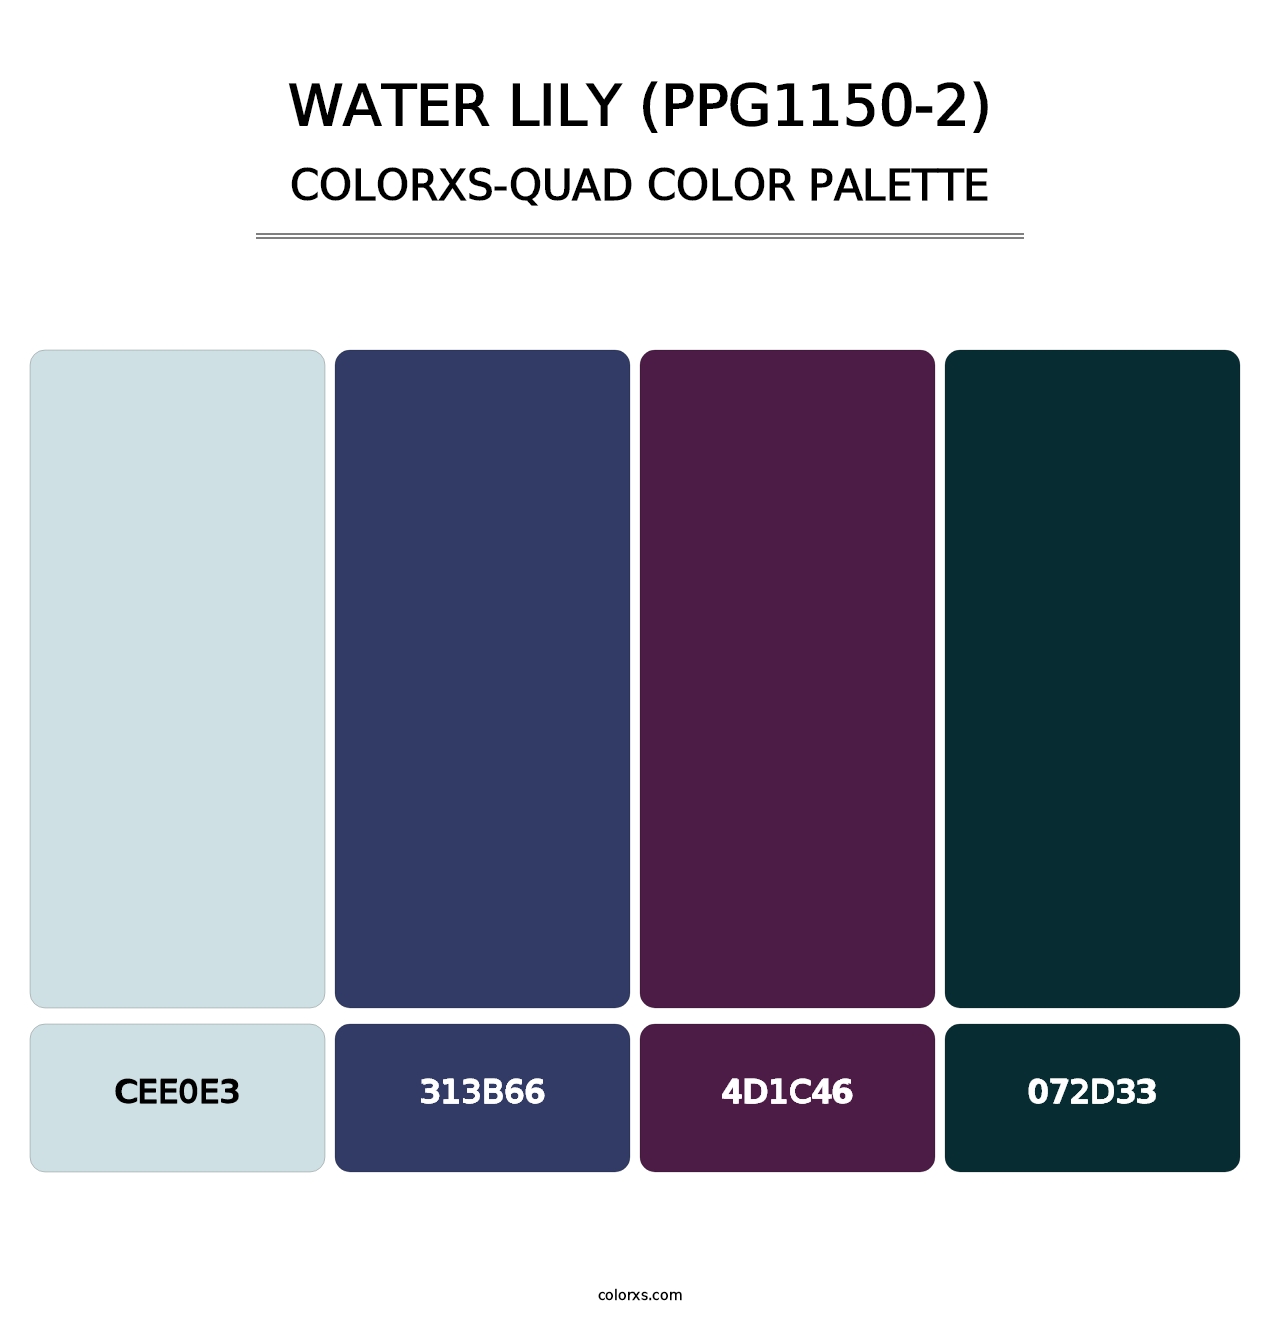 Water Lily (PPG1150-2) - Colorxs Quad Palette